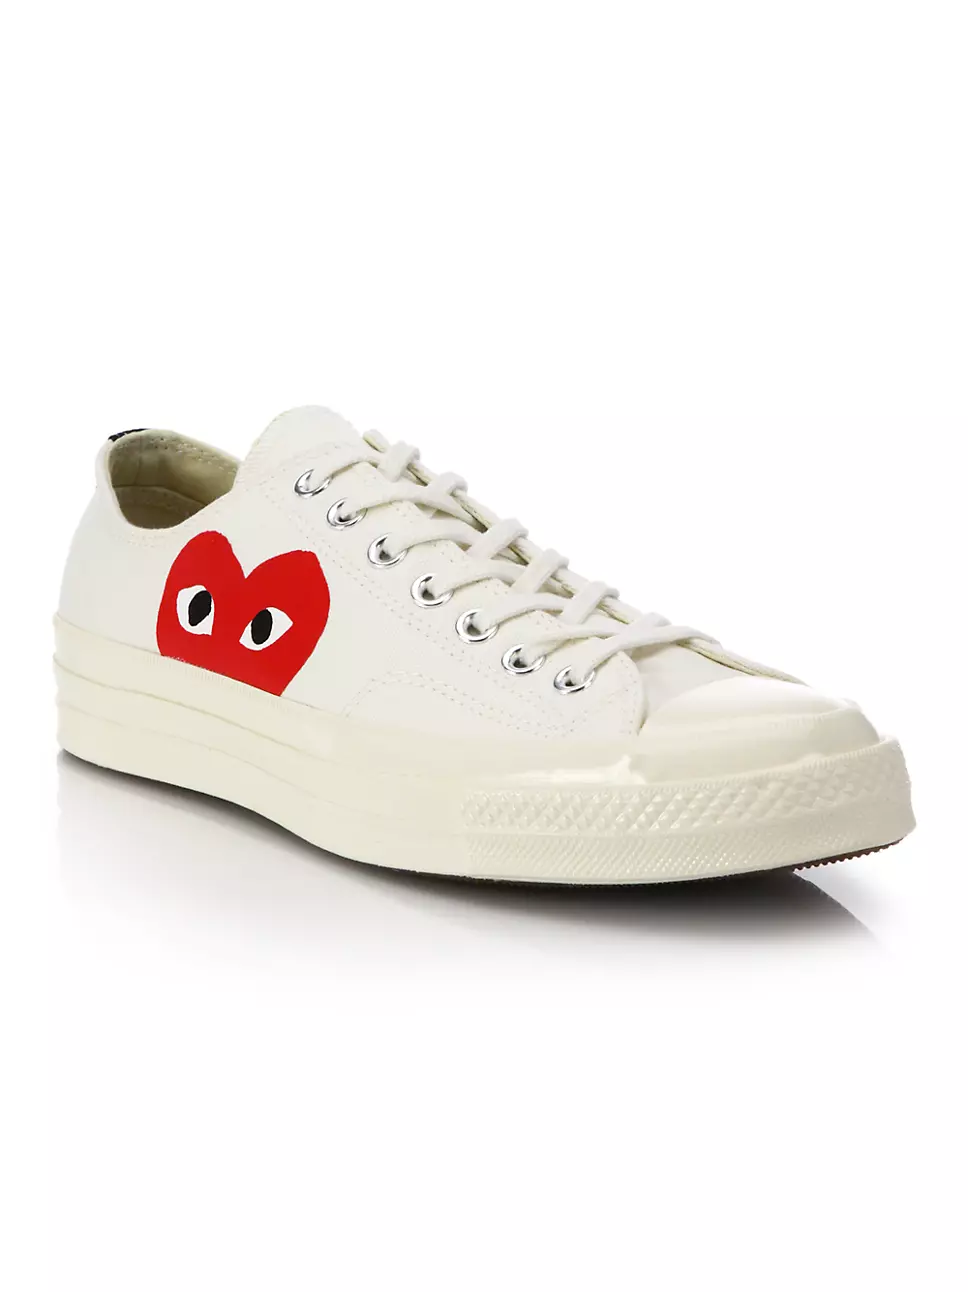 CdG PLAY x Converse Unisex Chuck Taylor All Star Peek-A-Boo Low-Top Sneakers